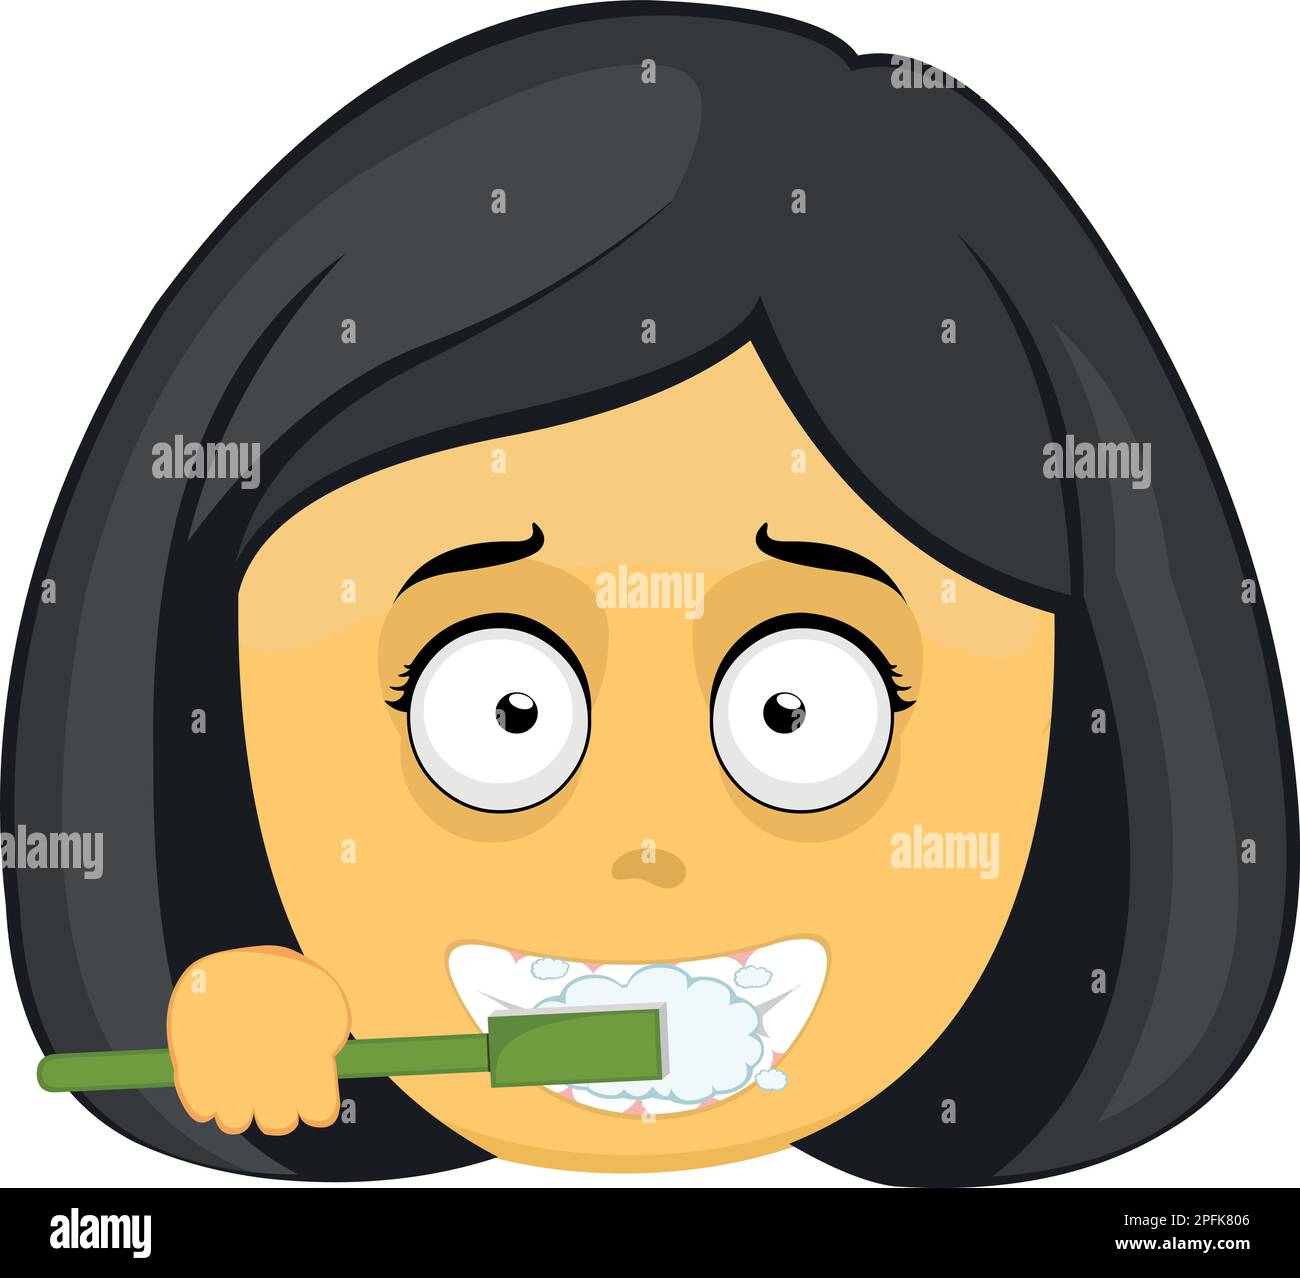 vector illustration emoticon of a woman face cartoon yellow color brushing her teeth Stock Vector